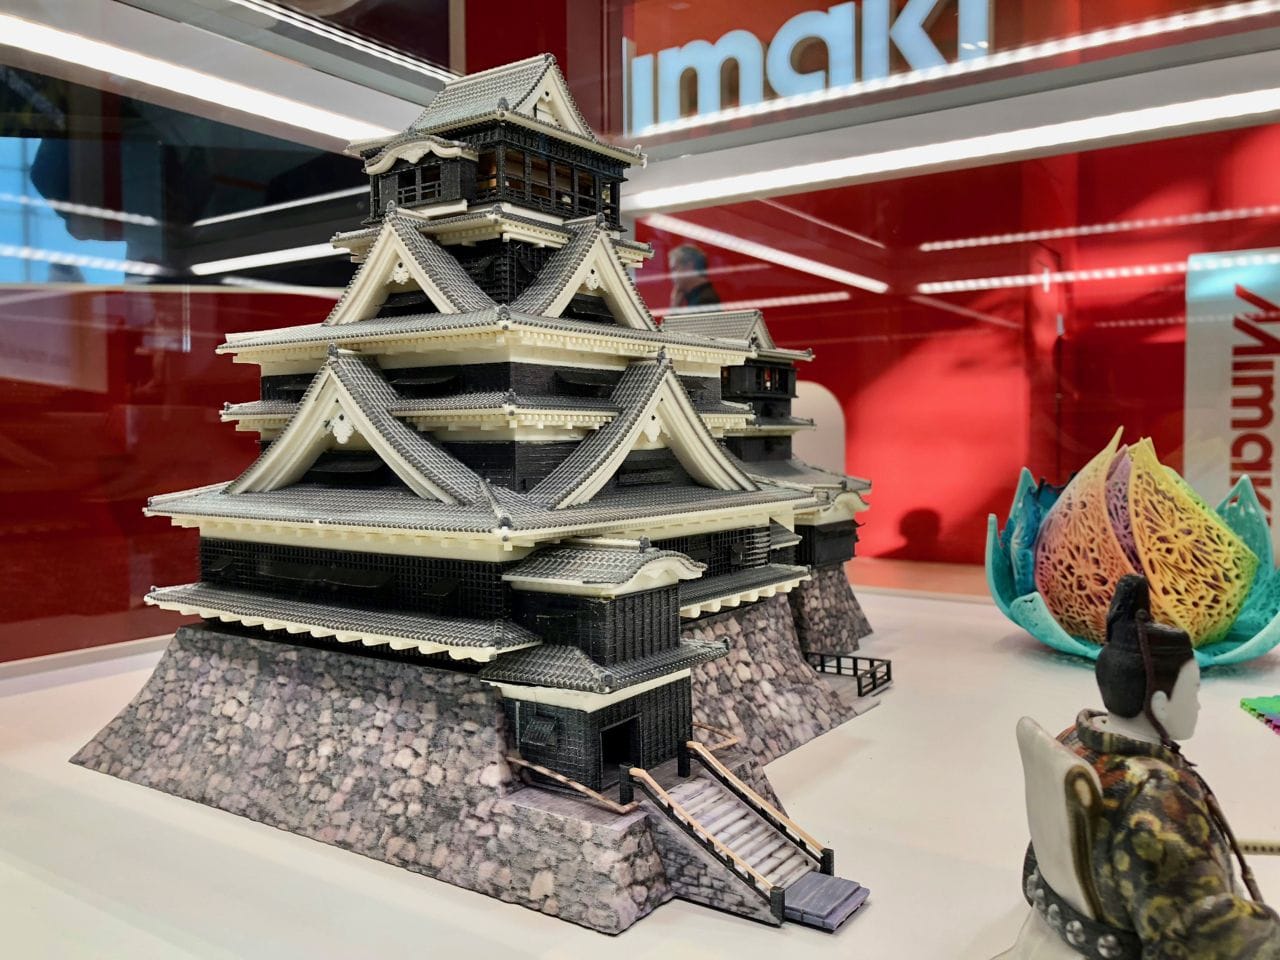  An incredibly detailed large full color 3D print by Mimaki's 3DUJ-553 